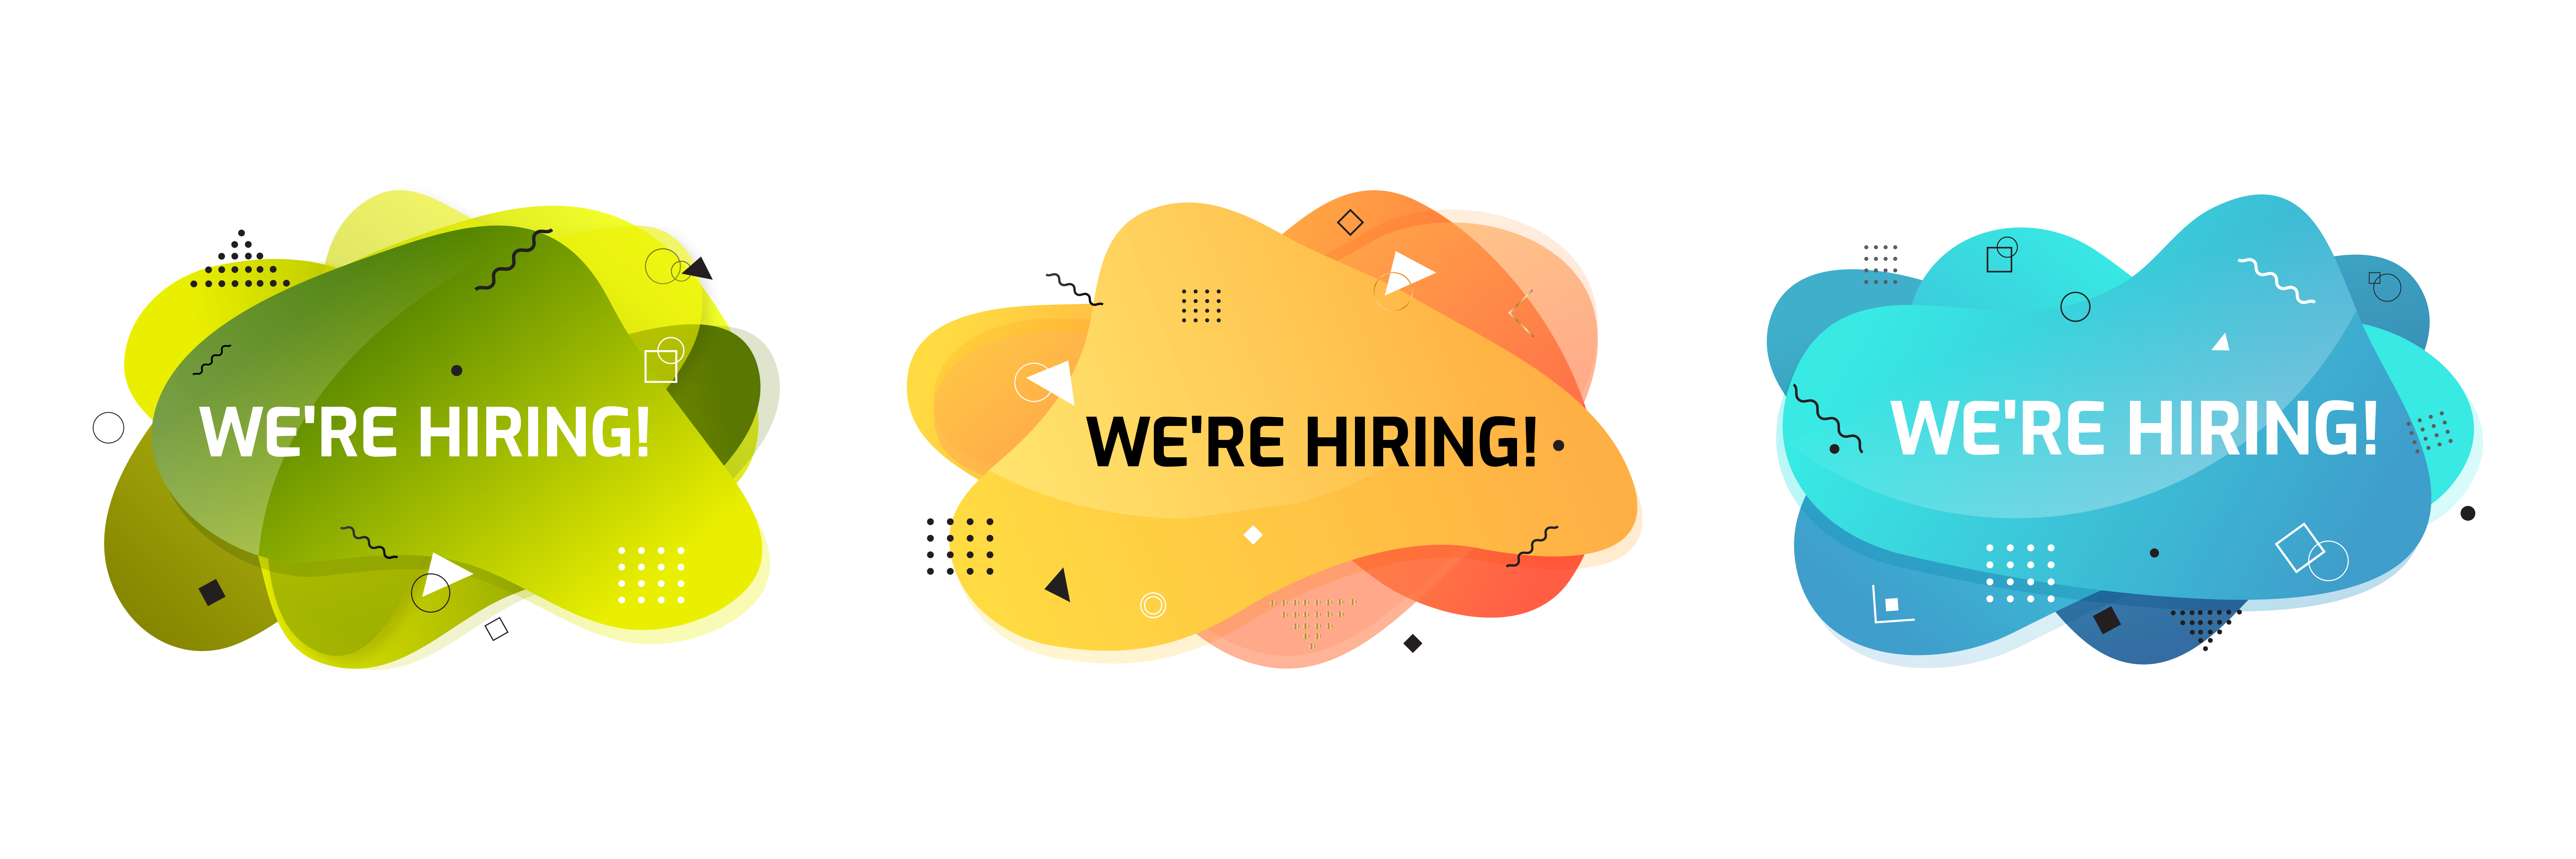 We're hiring banner. Hire sign. Searching new job concept. Abstract liquid shape. Fluid design